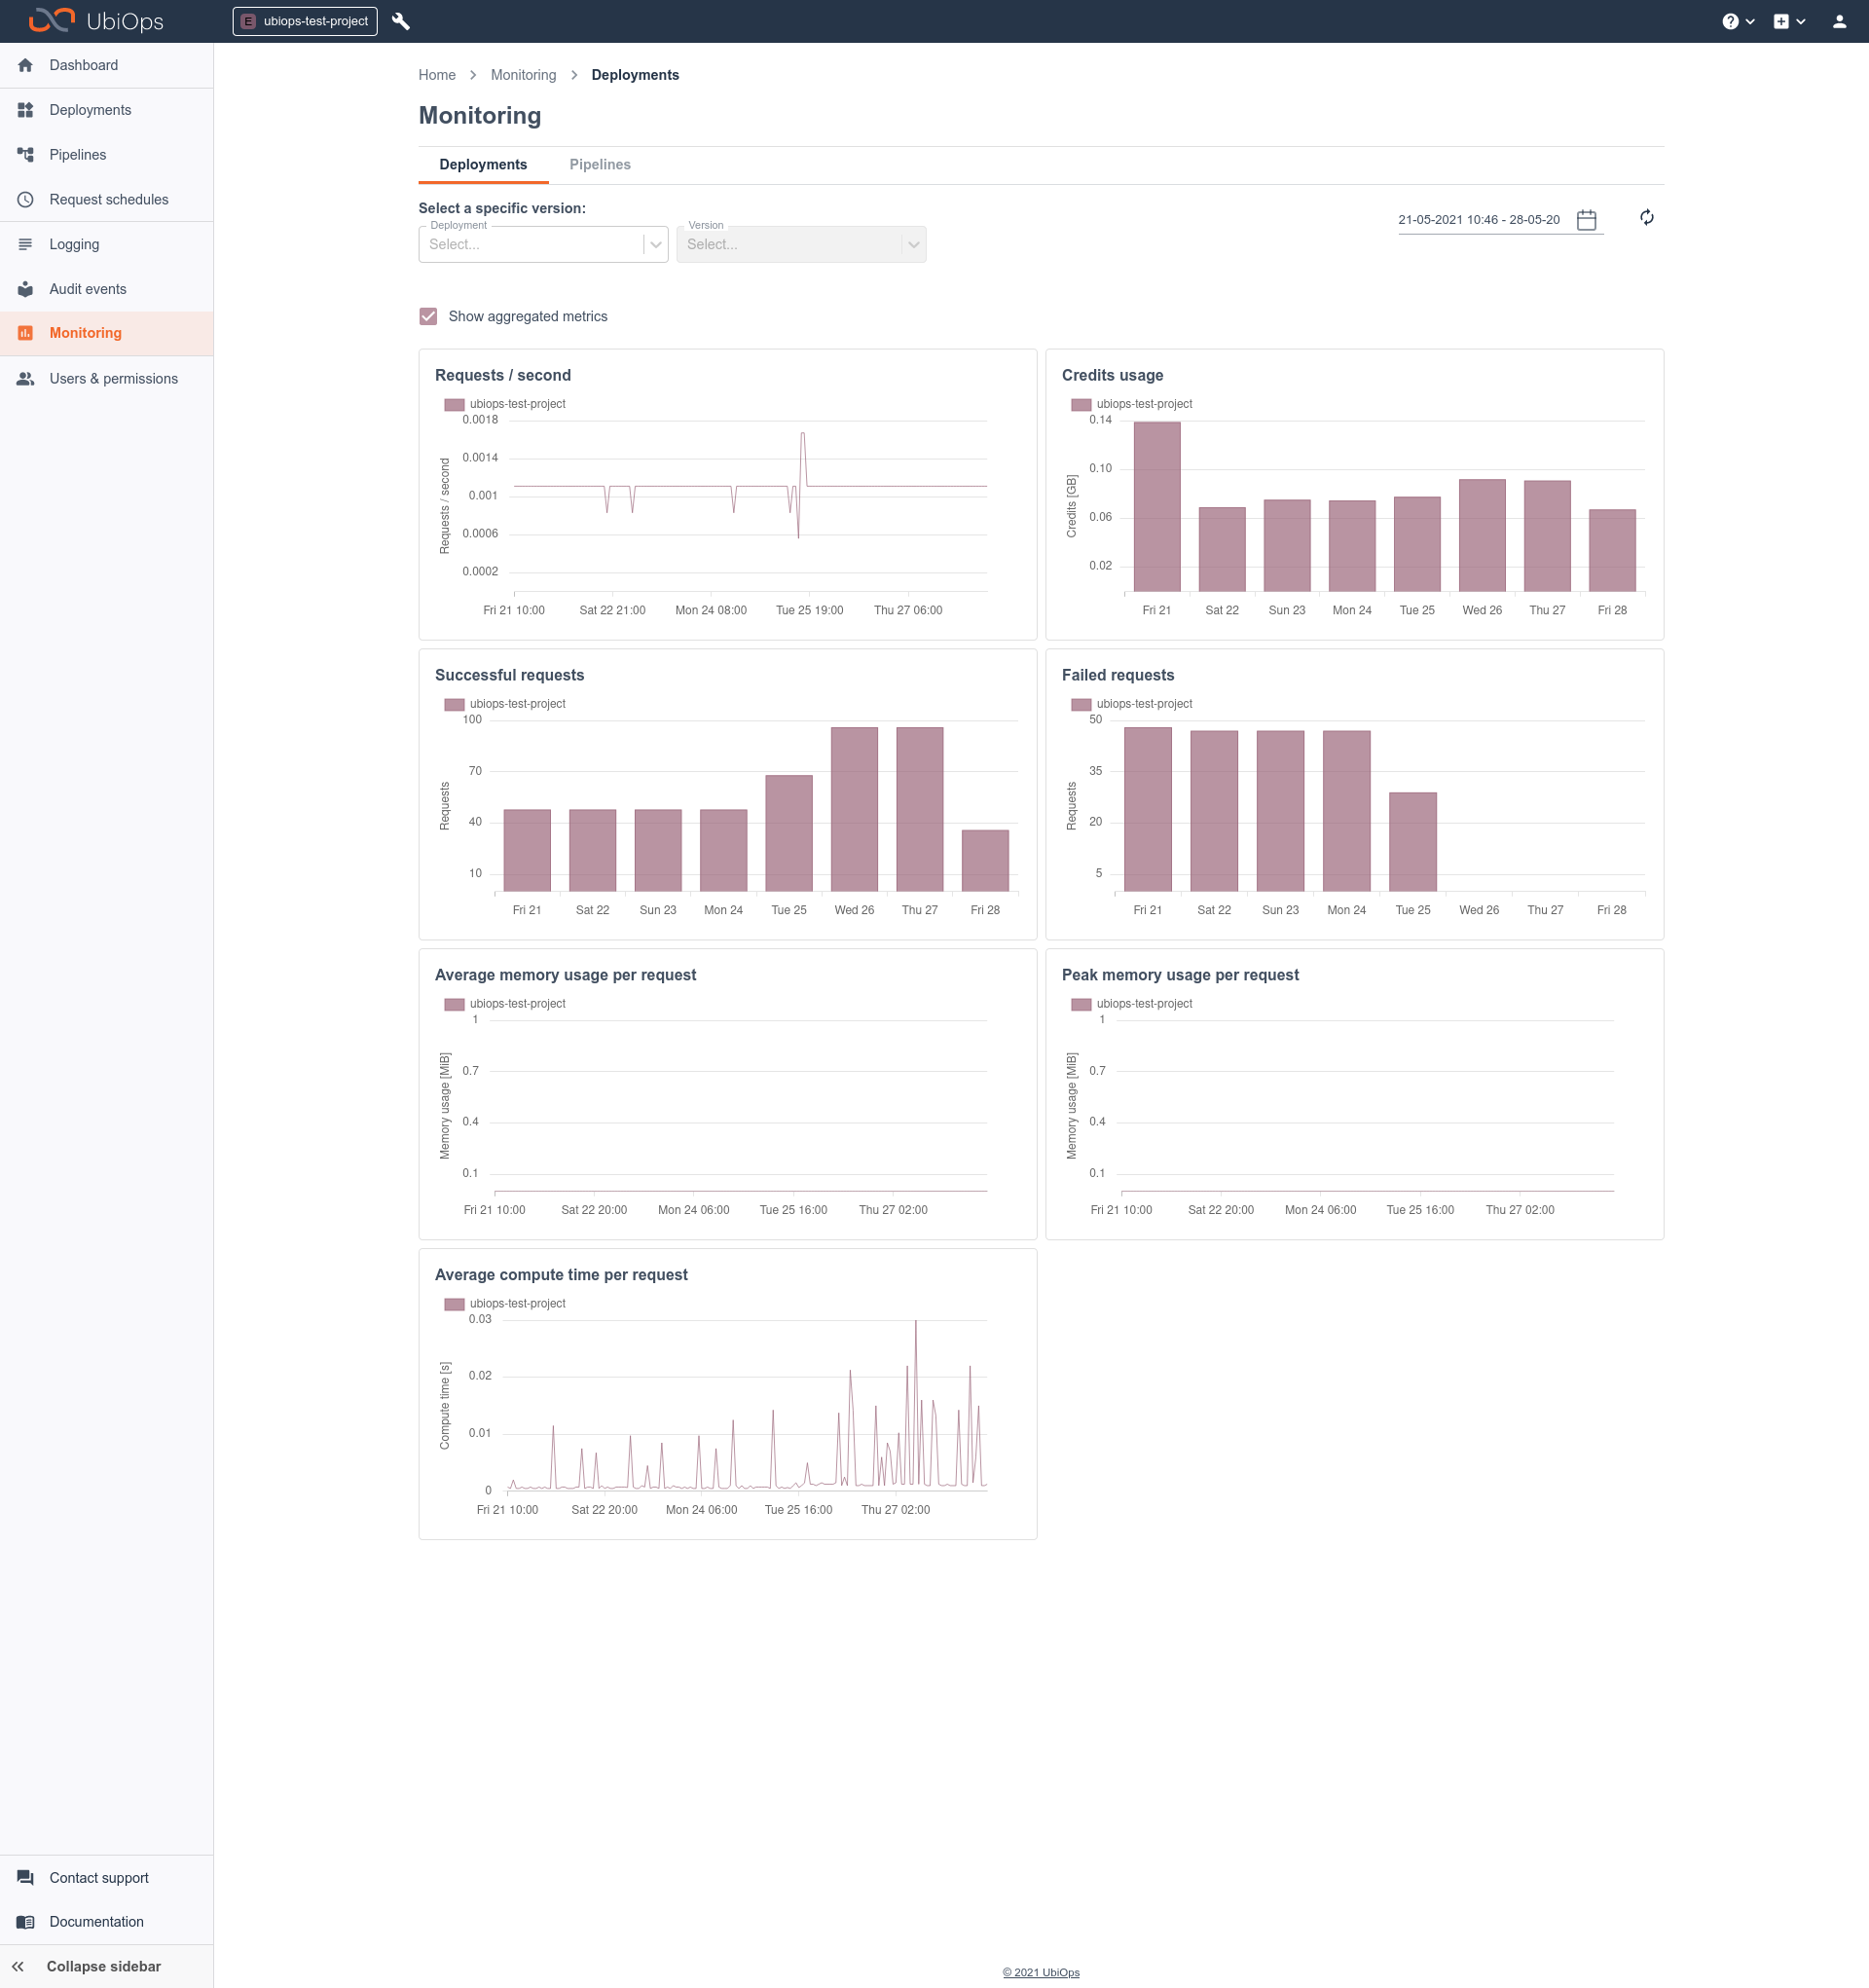 new-monitoring-page-showing-aggregated-metrics-for-deployments